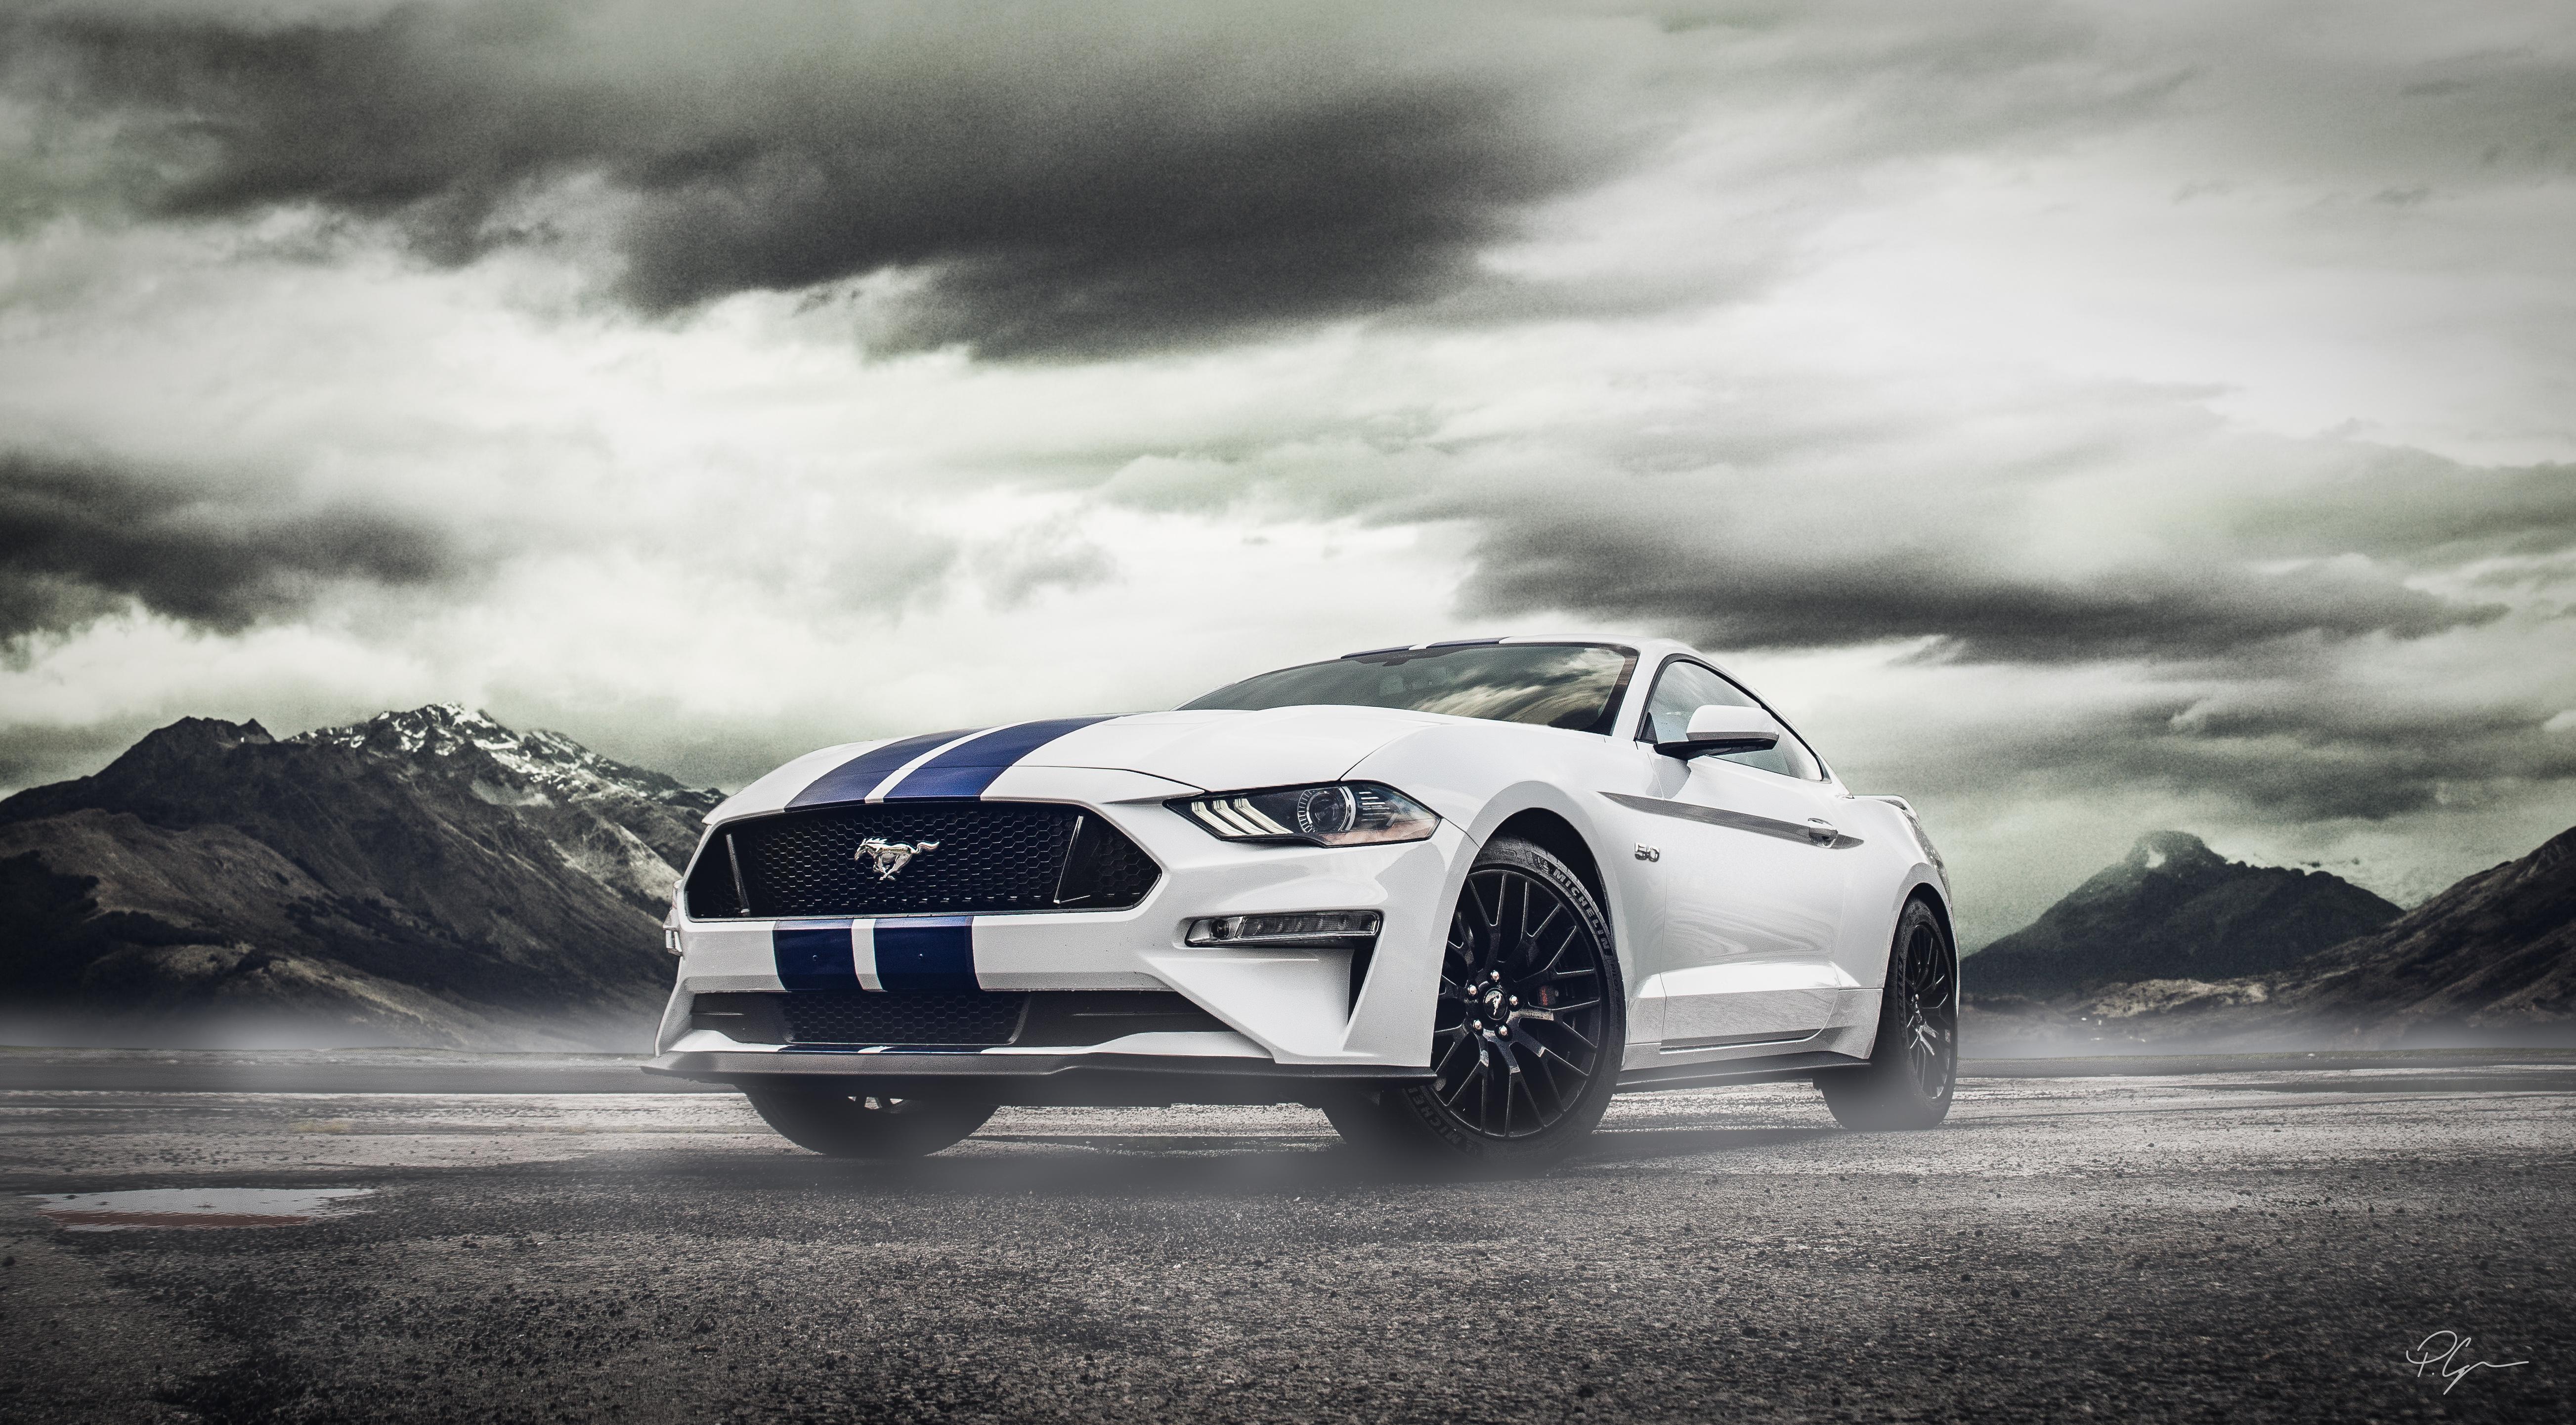 Free photo White Ford Mustang with blue stripes